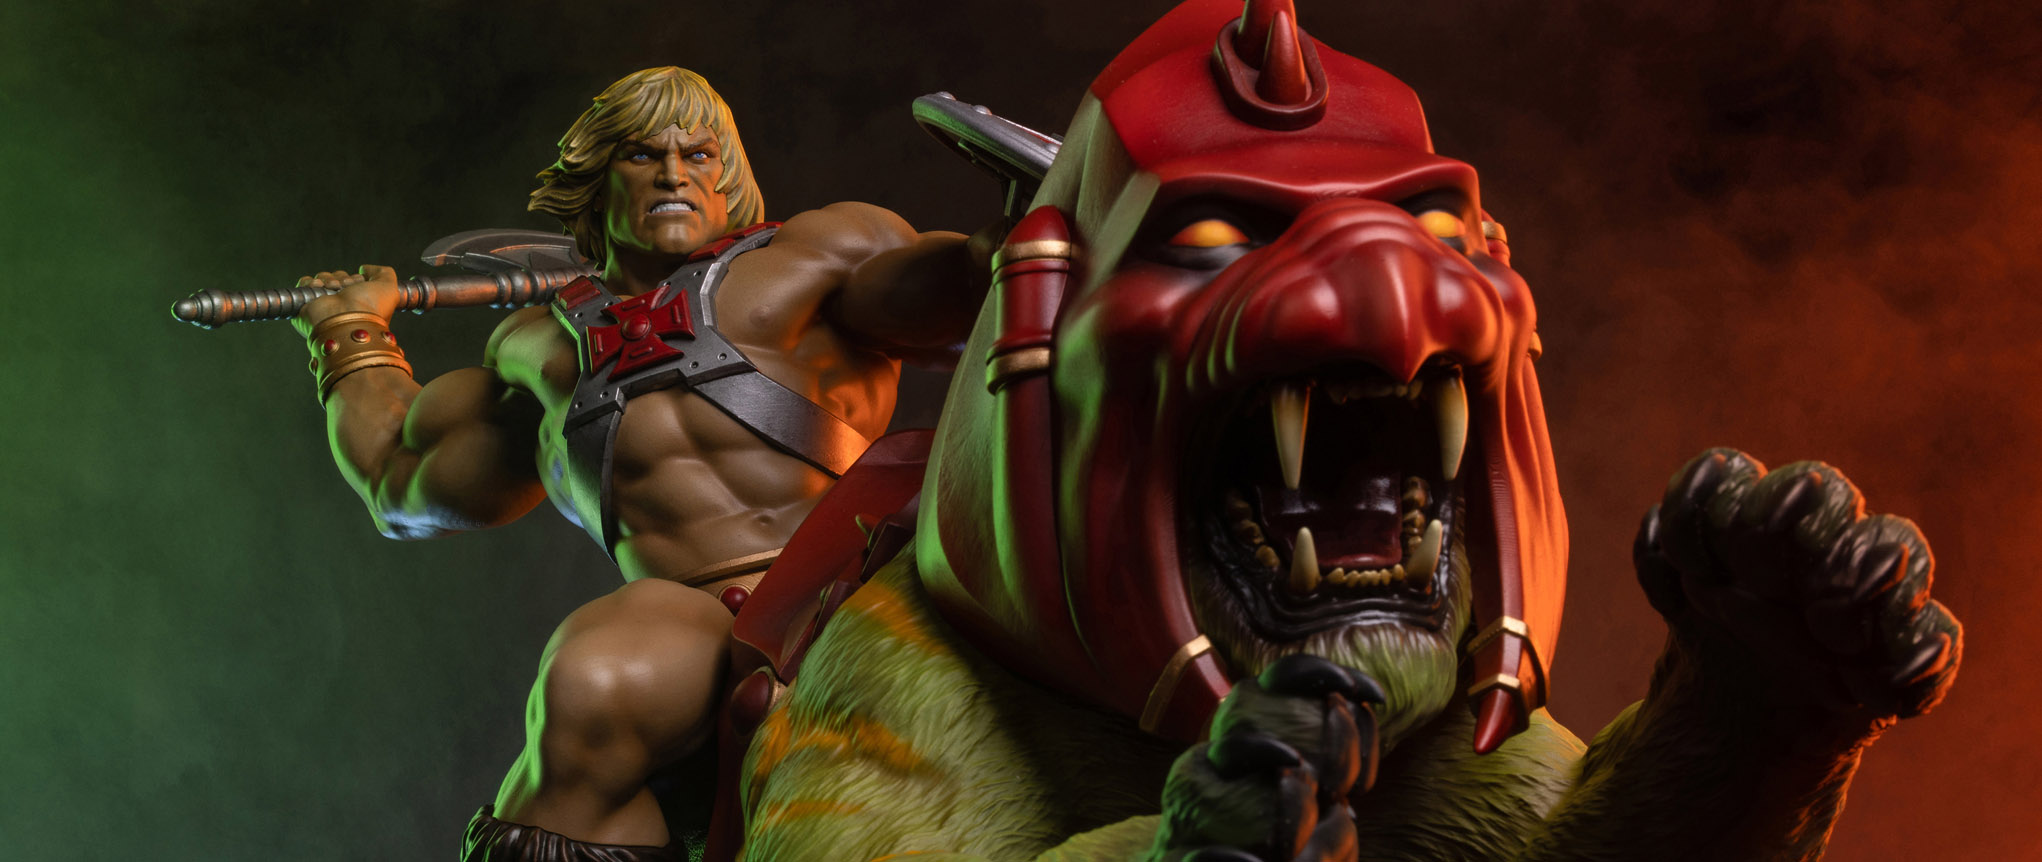 He-Man and Battle Cat Deluxe Maquette